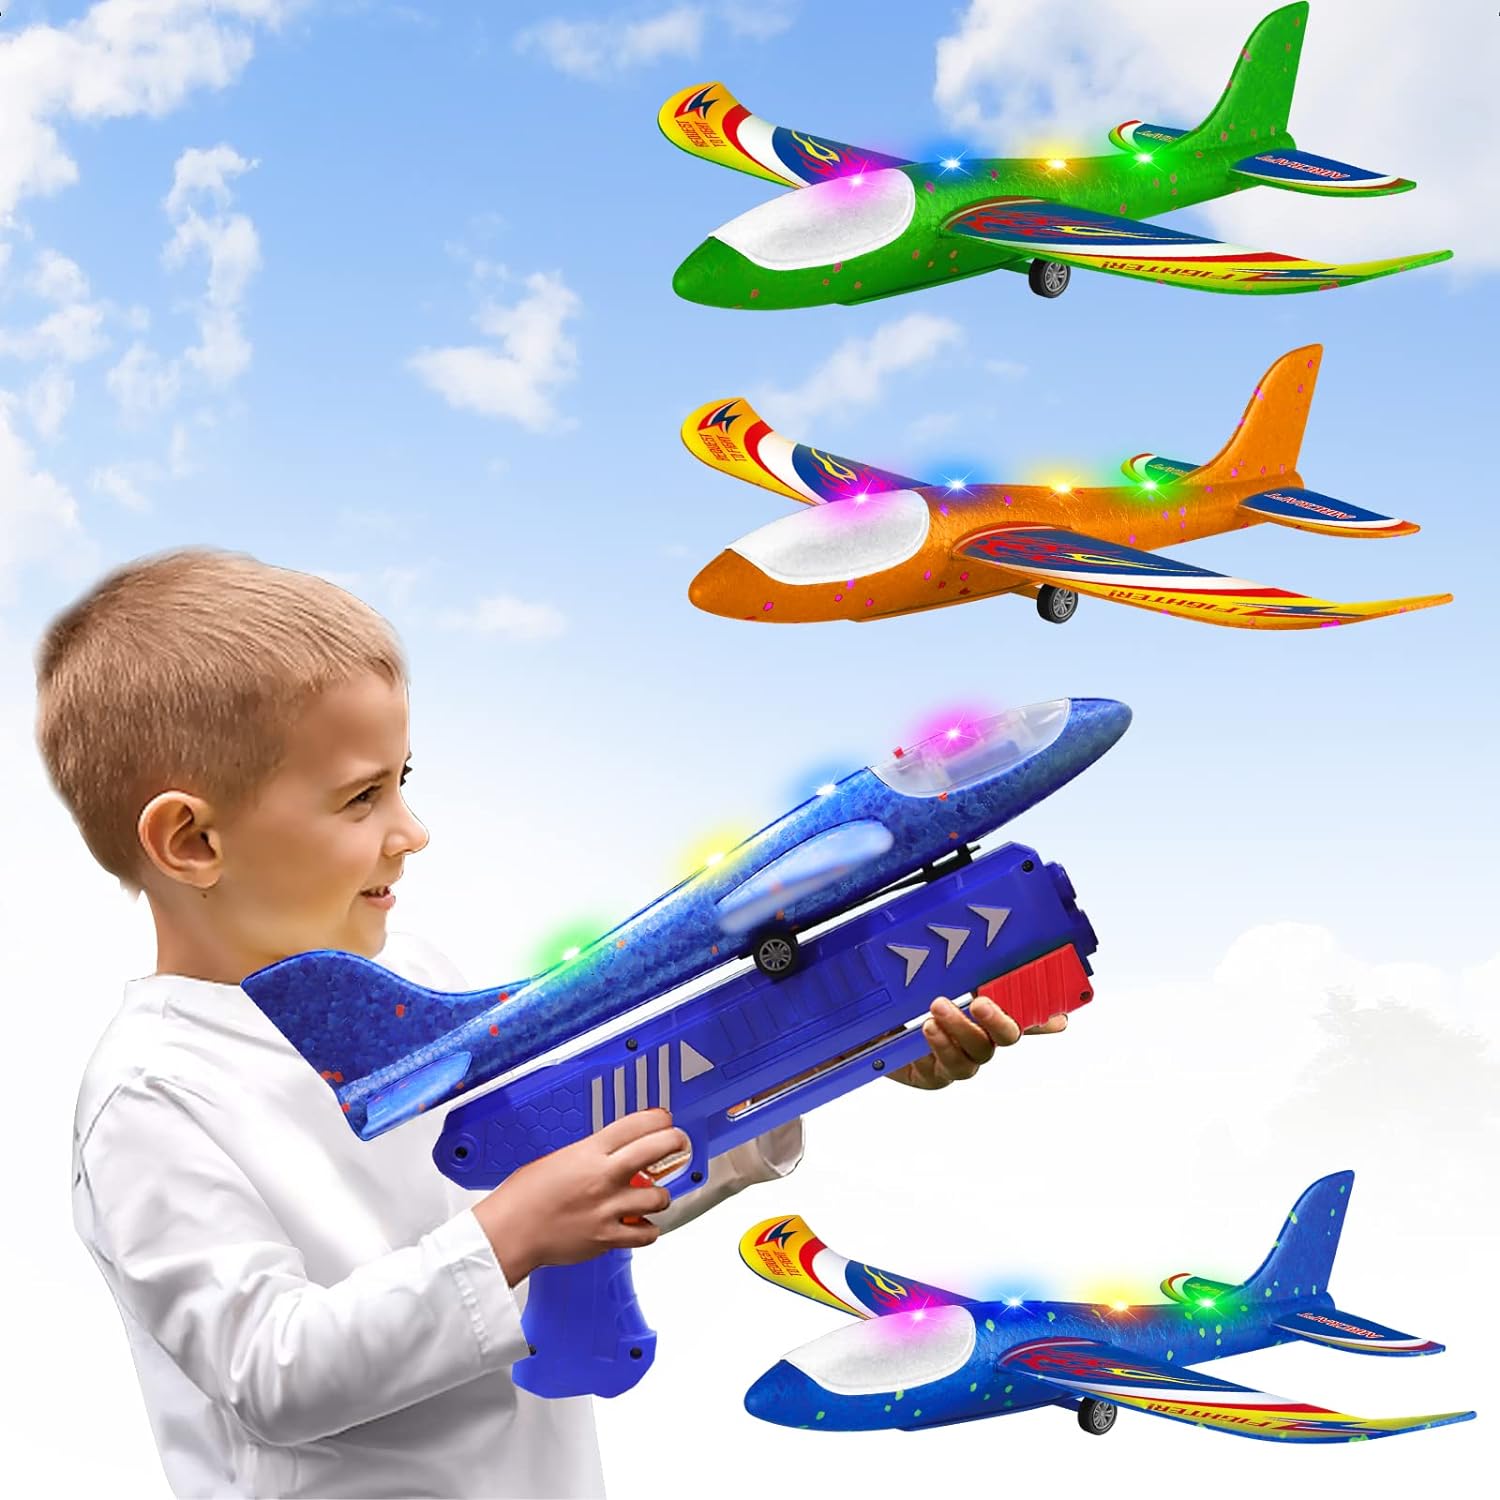 Wesfuner 3 Pack Foam Airplane Launcher Toys, 2 Flight Mode Glider Plane,Kids Flying Toy,3 4 5 6 7 8 9 10 11 12 Year Old Boys Girls Gifts,Outdoor Sport Party Favor : Toys  Games